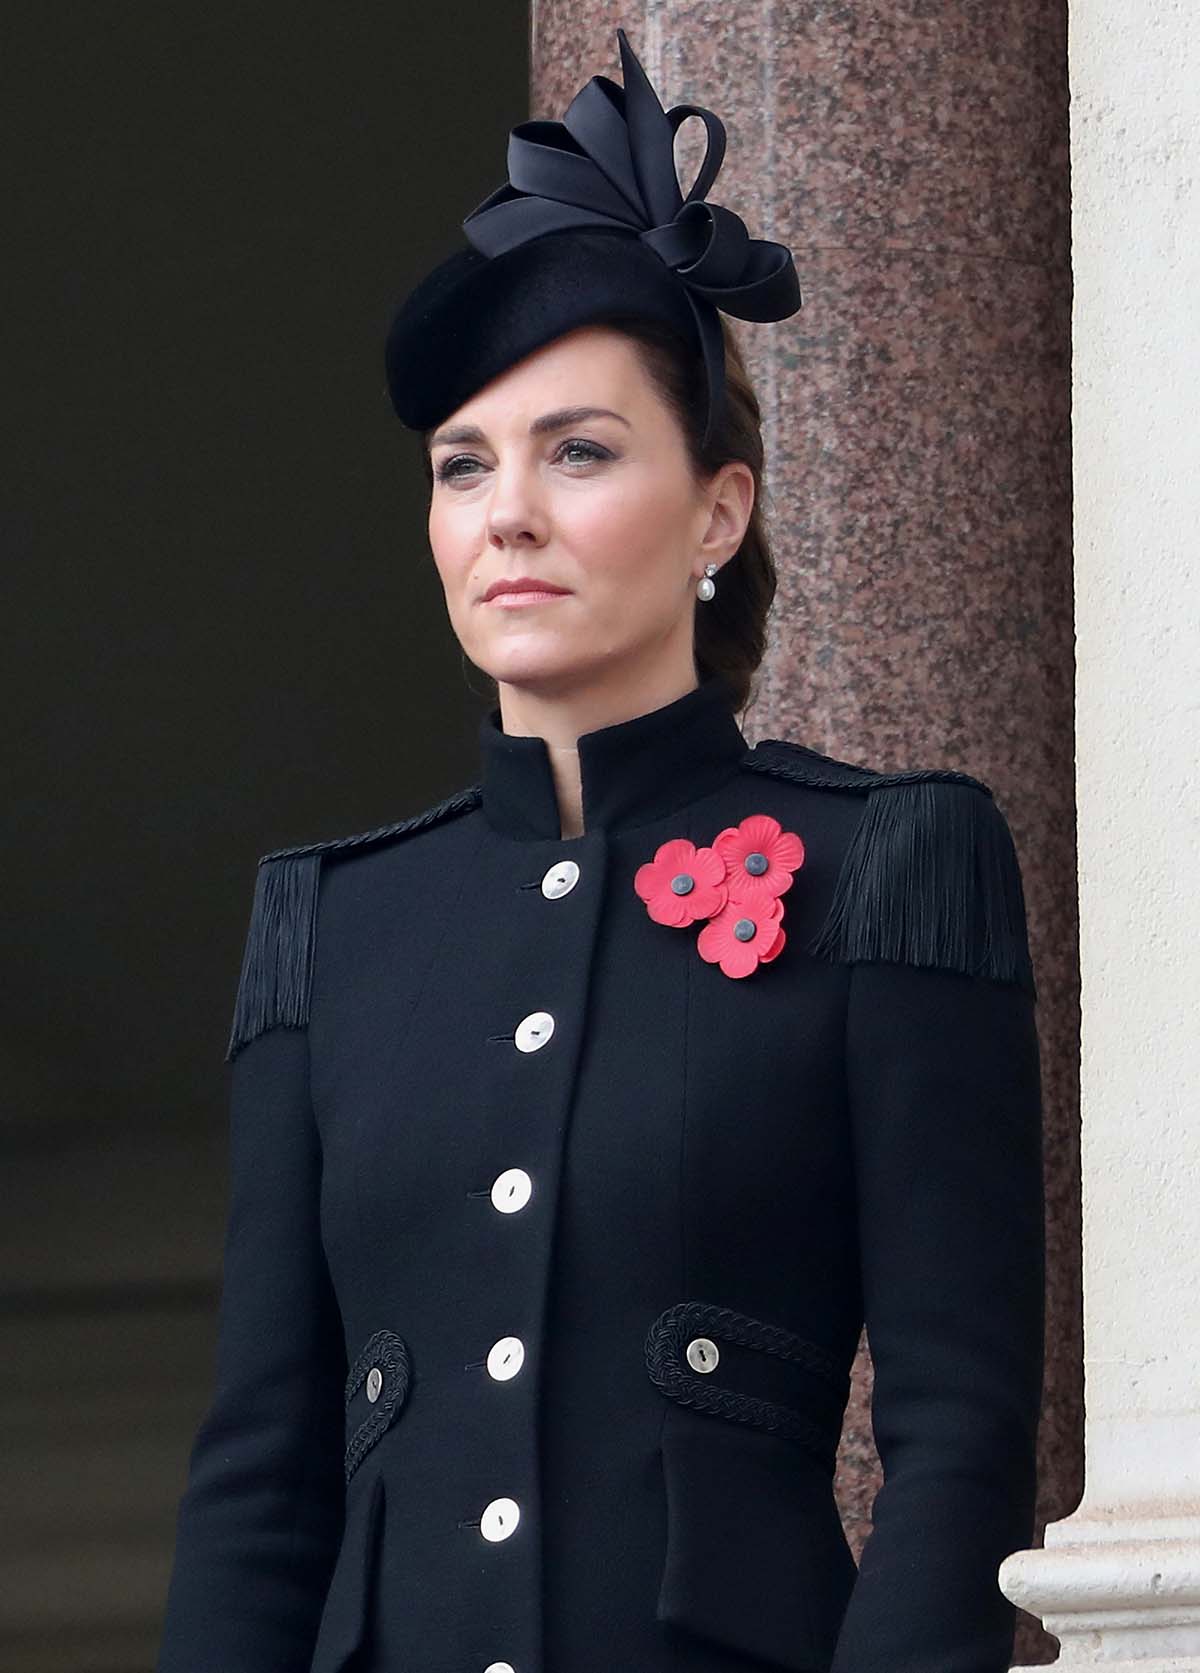 Britain's Catherine, Duchess of Cambridge attends the National Service of Remembrance at The Cenotaph on Whitehall in London, Britain November 8, 2020. Chris Jackson/Pool via REUTERS *** Local Caption *** .